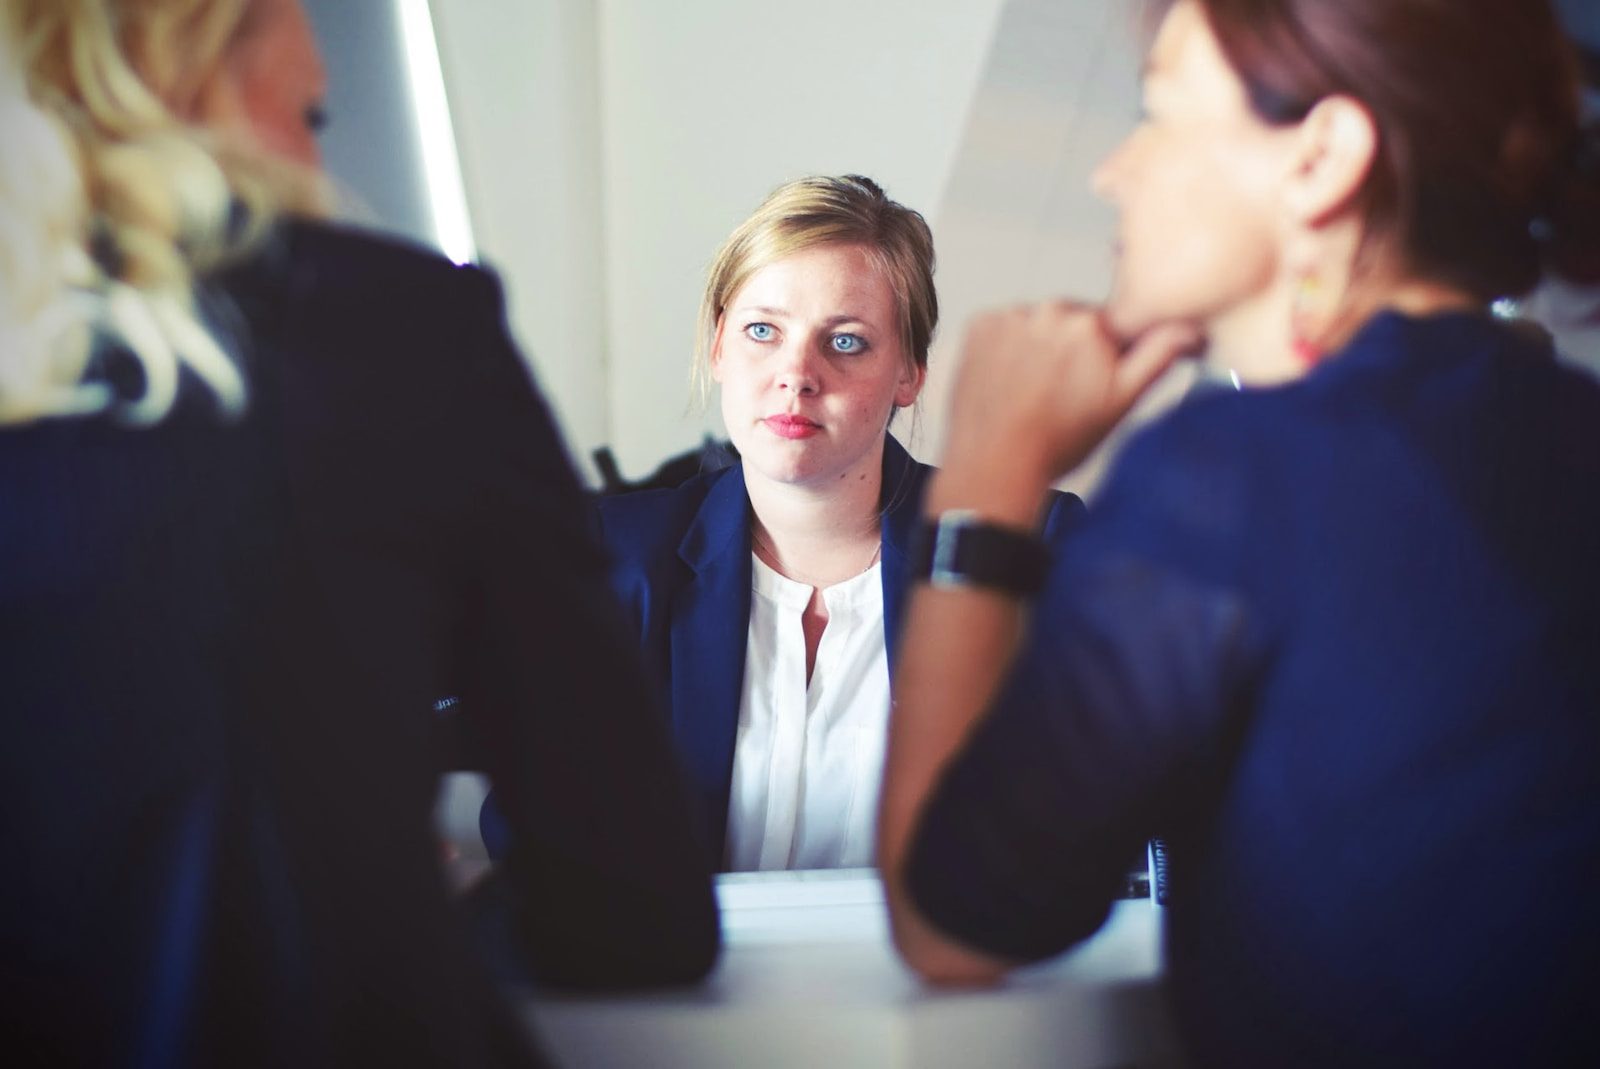 Common reasons professionals fail in interviews